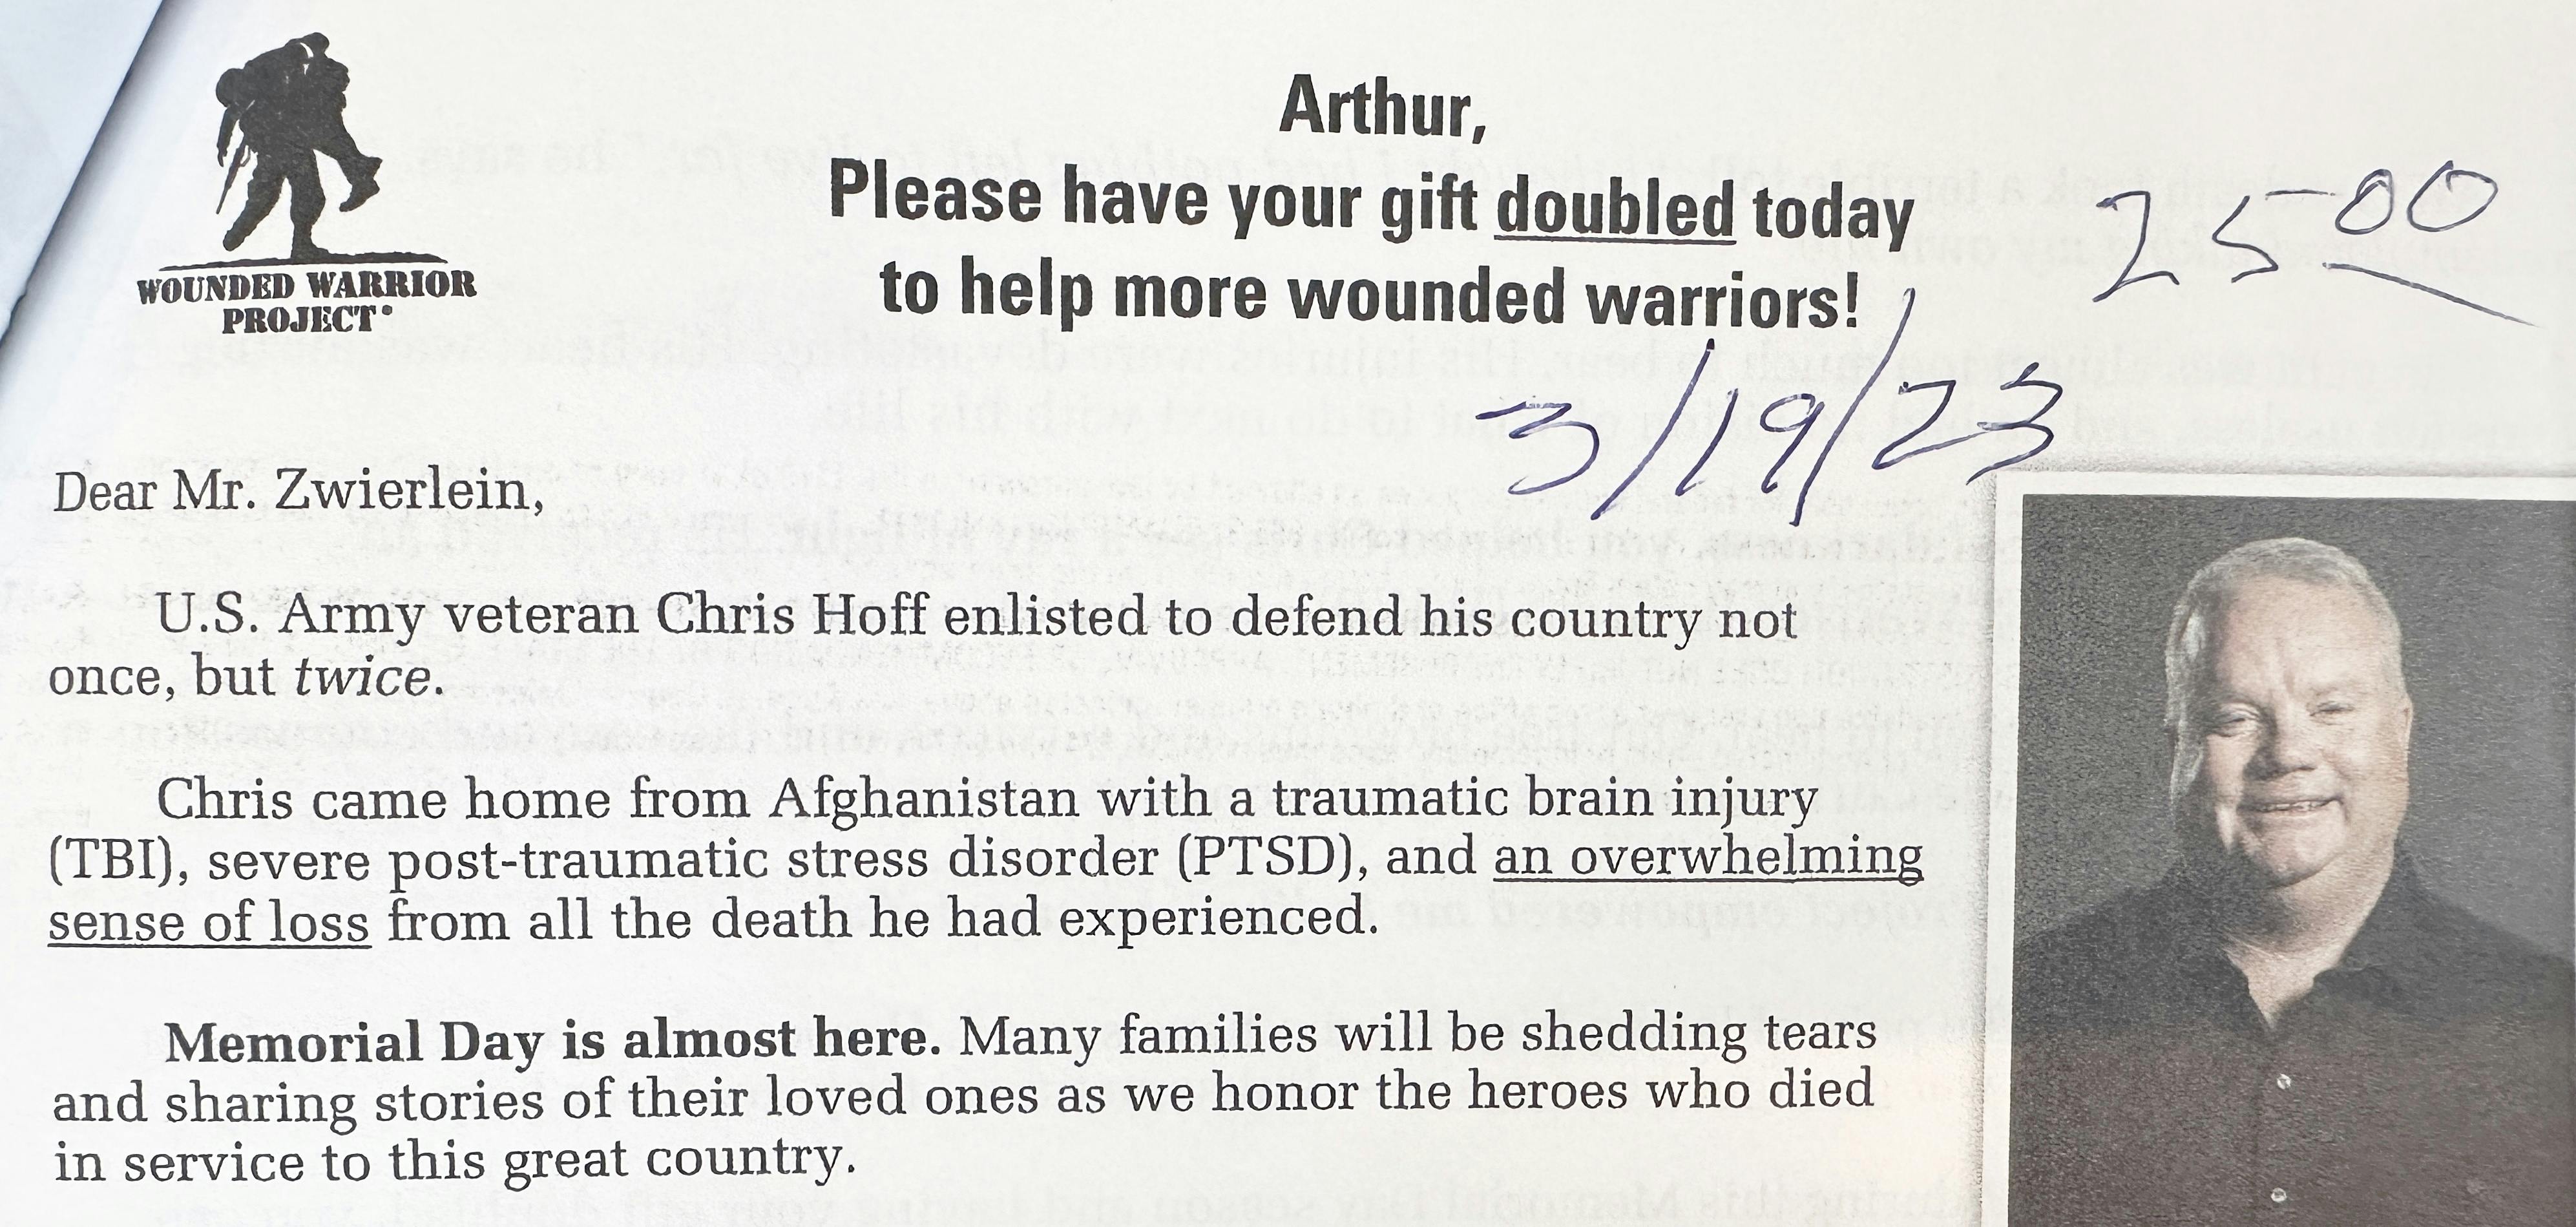 photo showing Wounded Warrior Project appeal letter with handwritten note from Bud